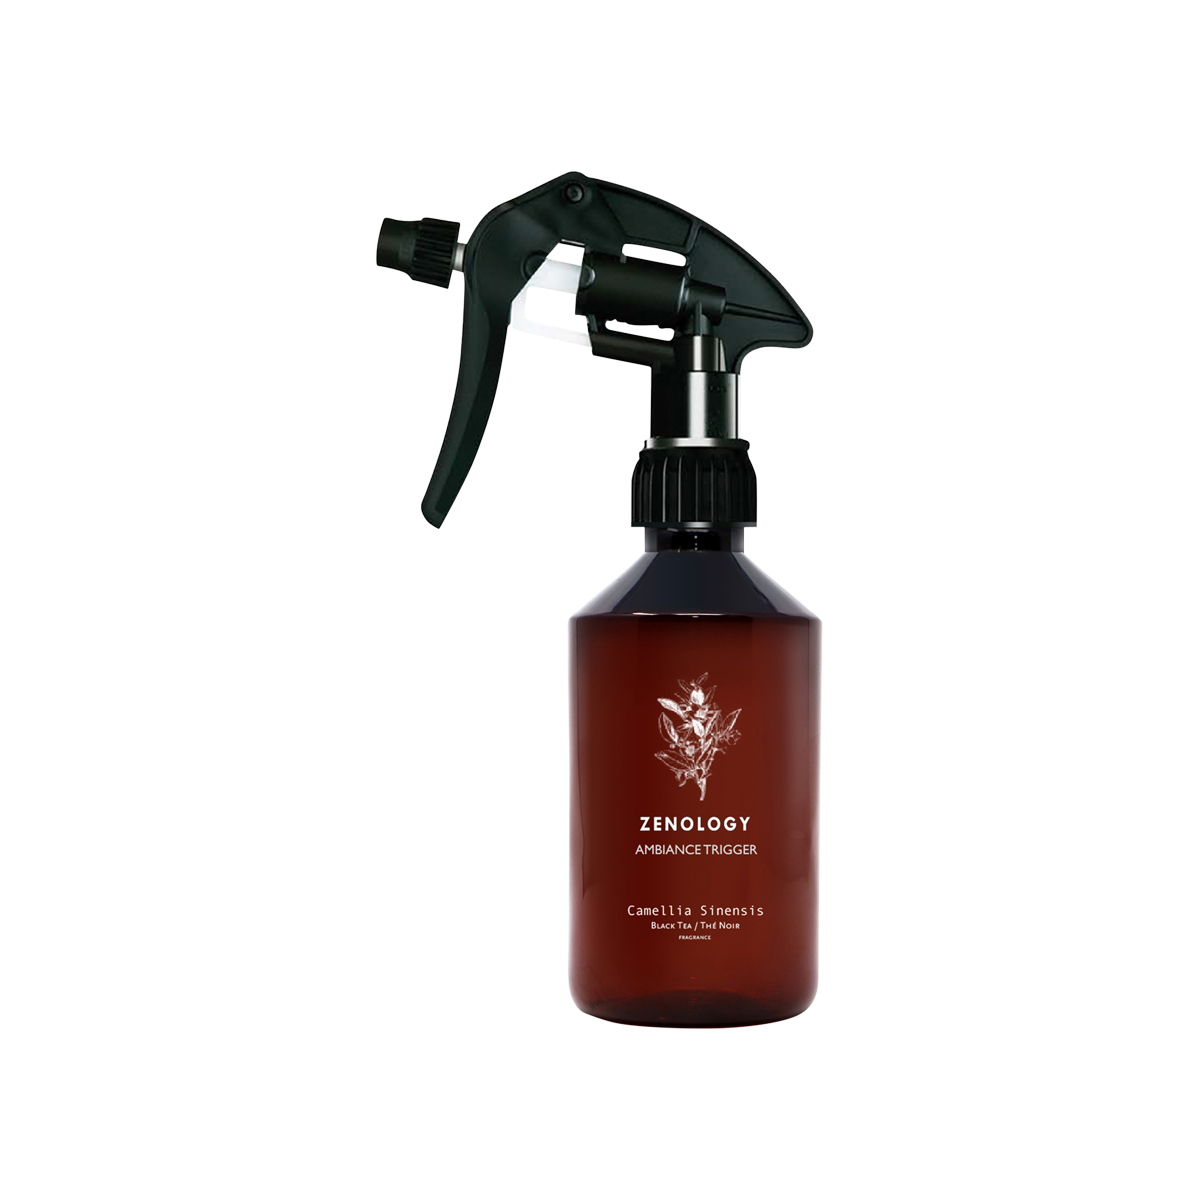 Zenology - Camellia Sinensis Ambiance Trigger Spray